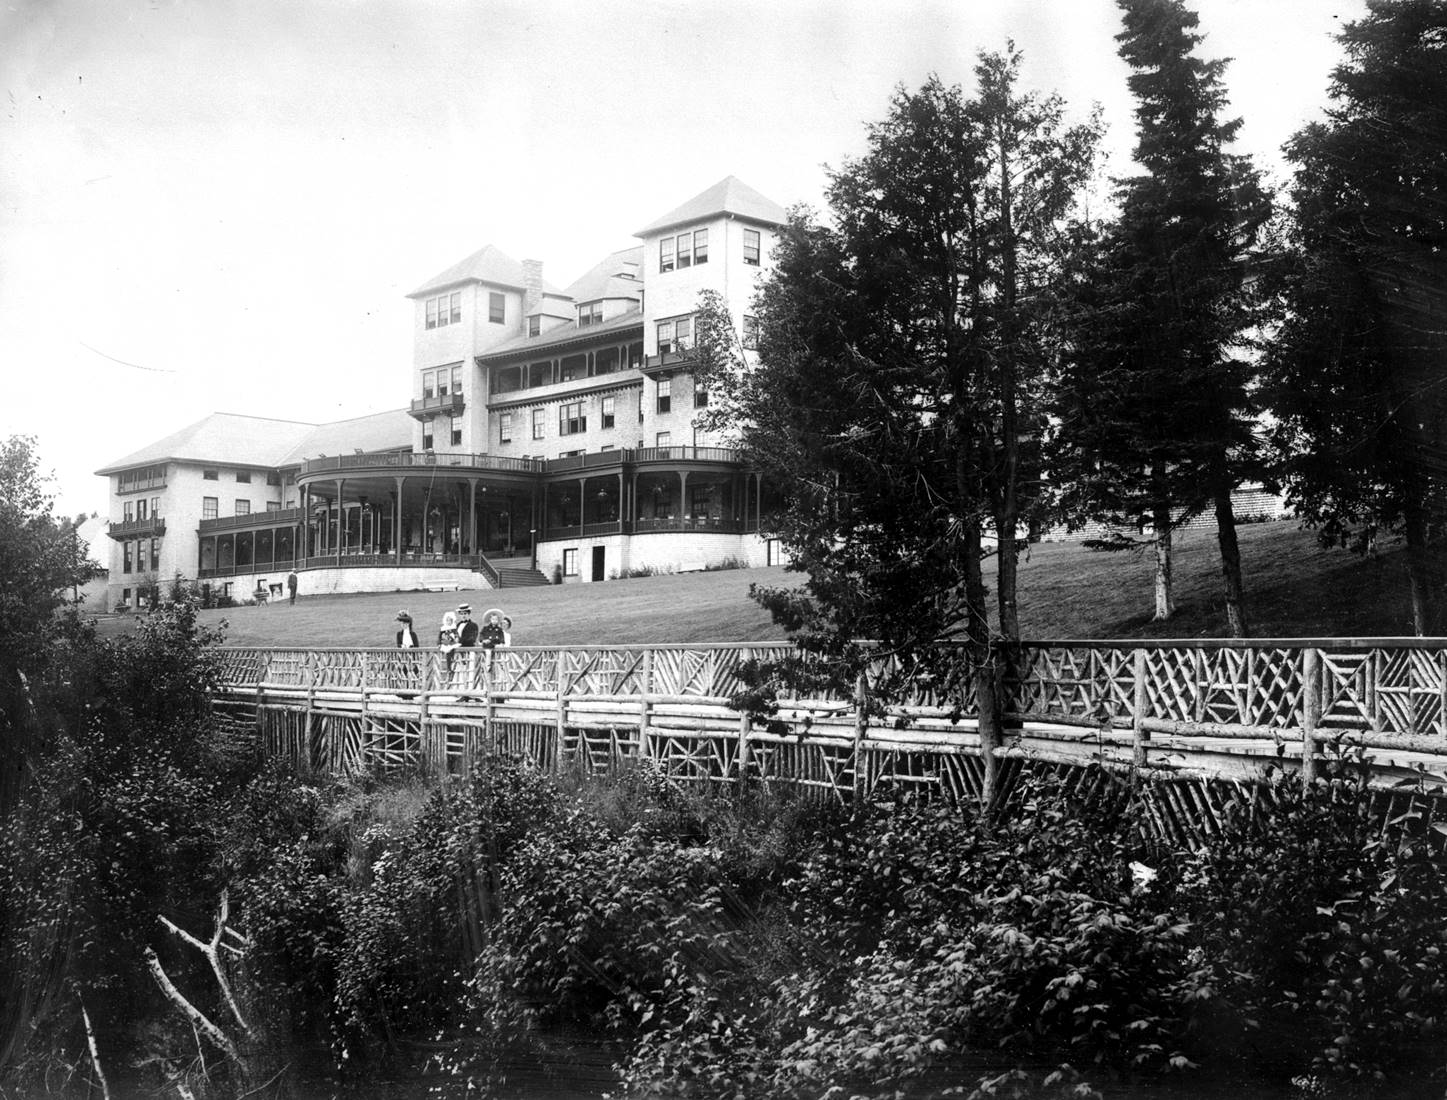 A large hotel with big verandas, ladies and young childrentaking in the scenery near a fence.